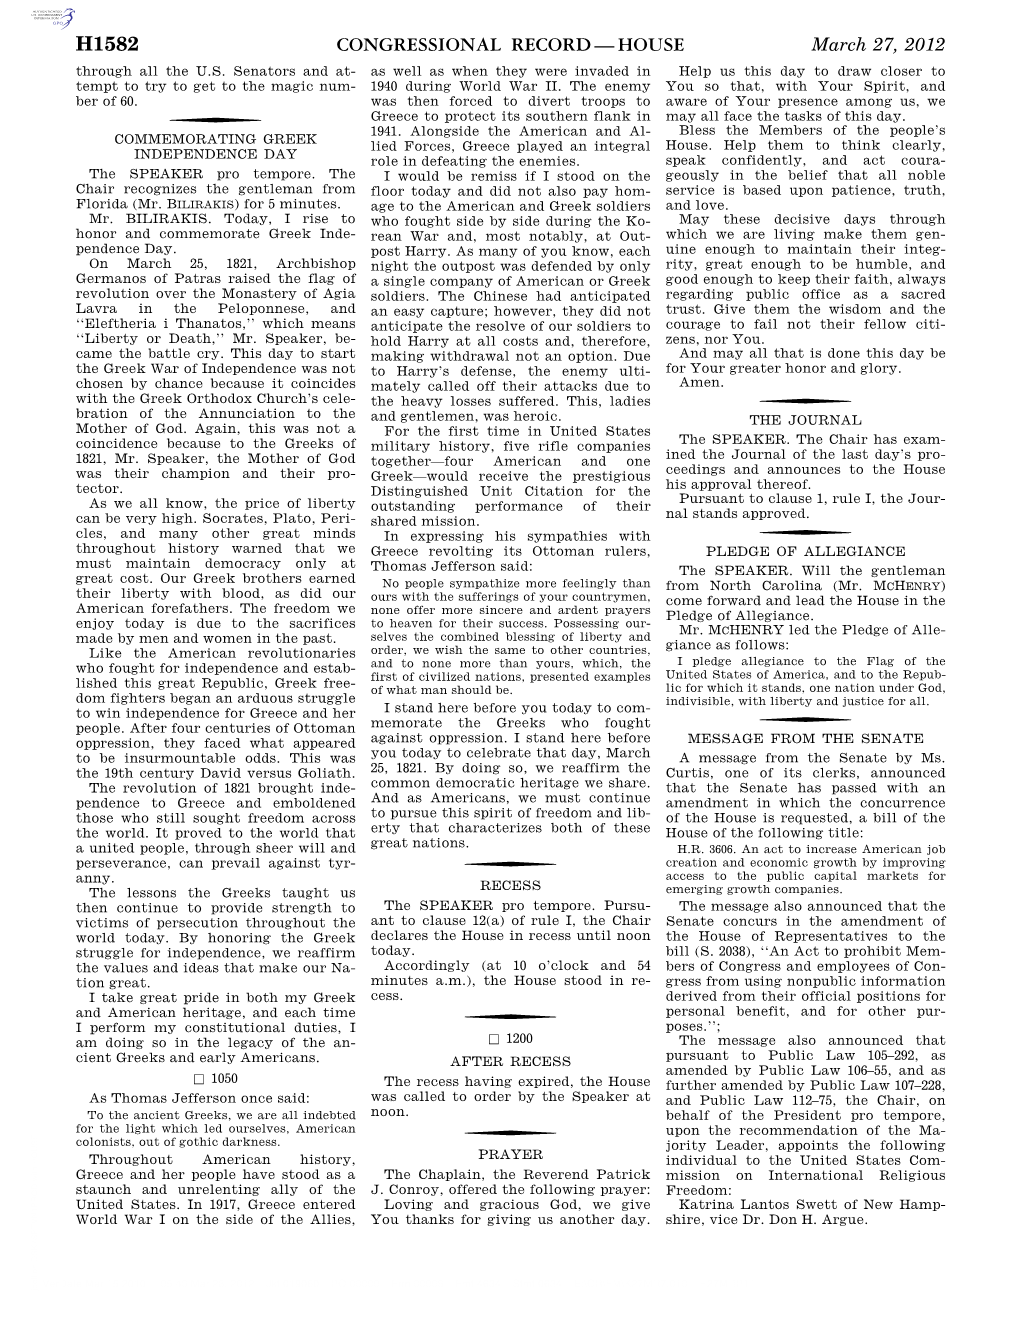 Congressional Record—House H1582